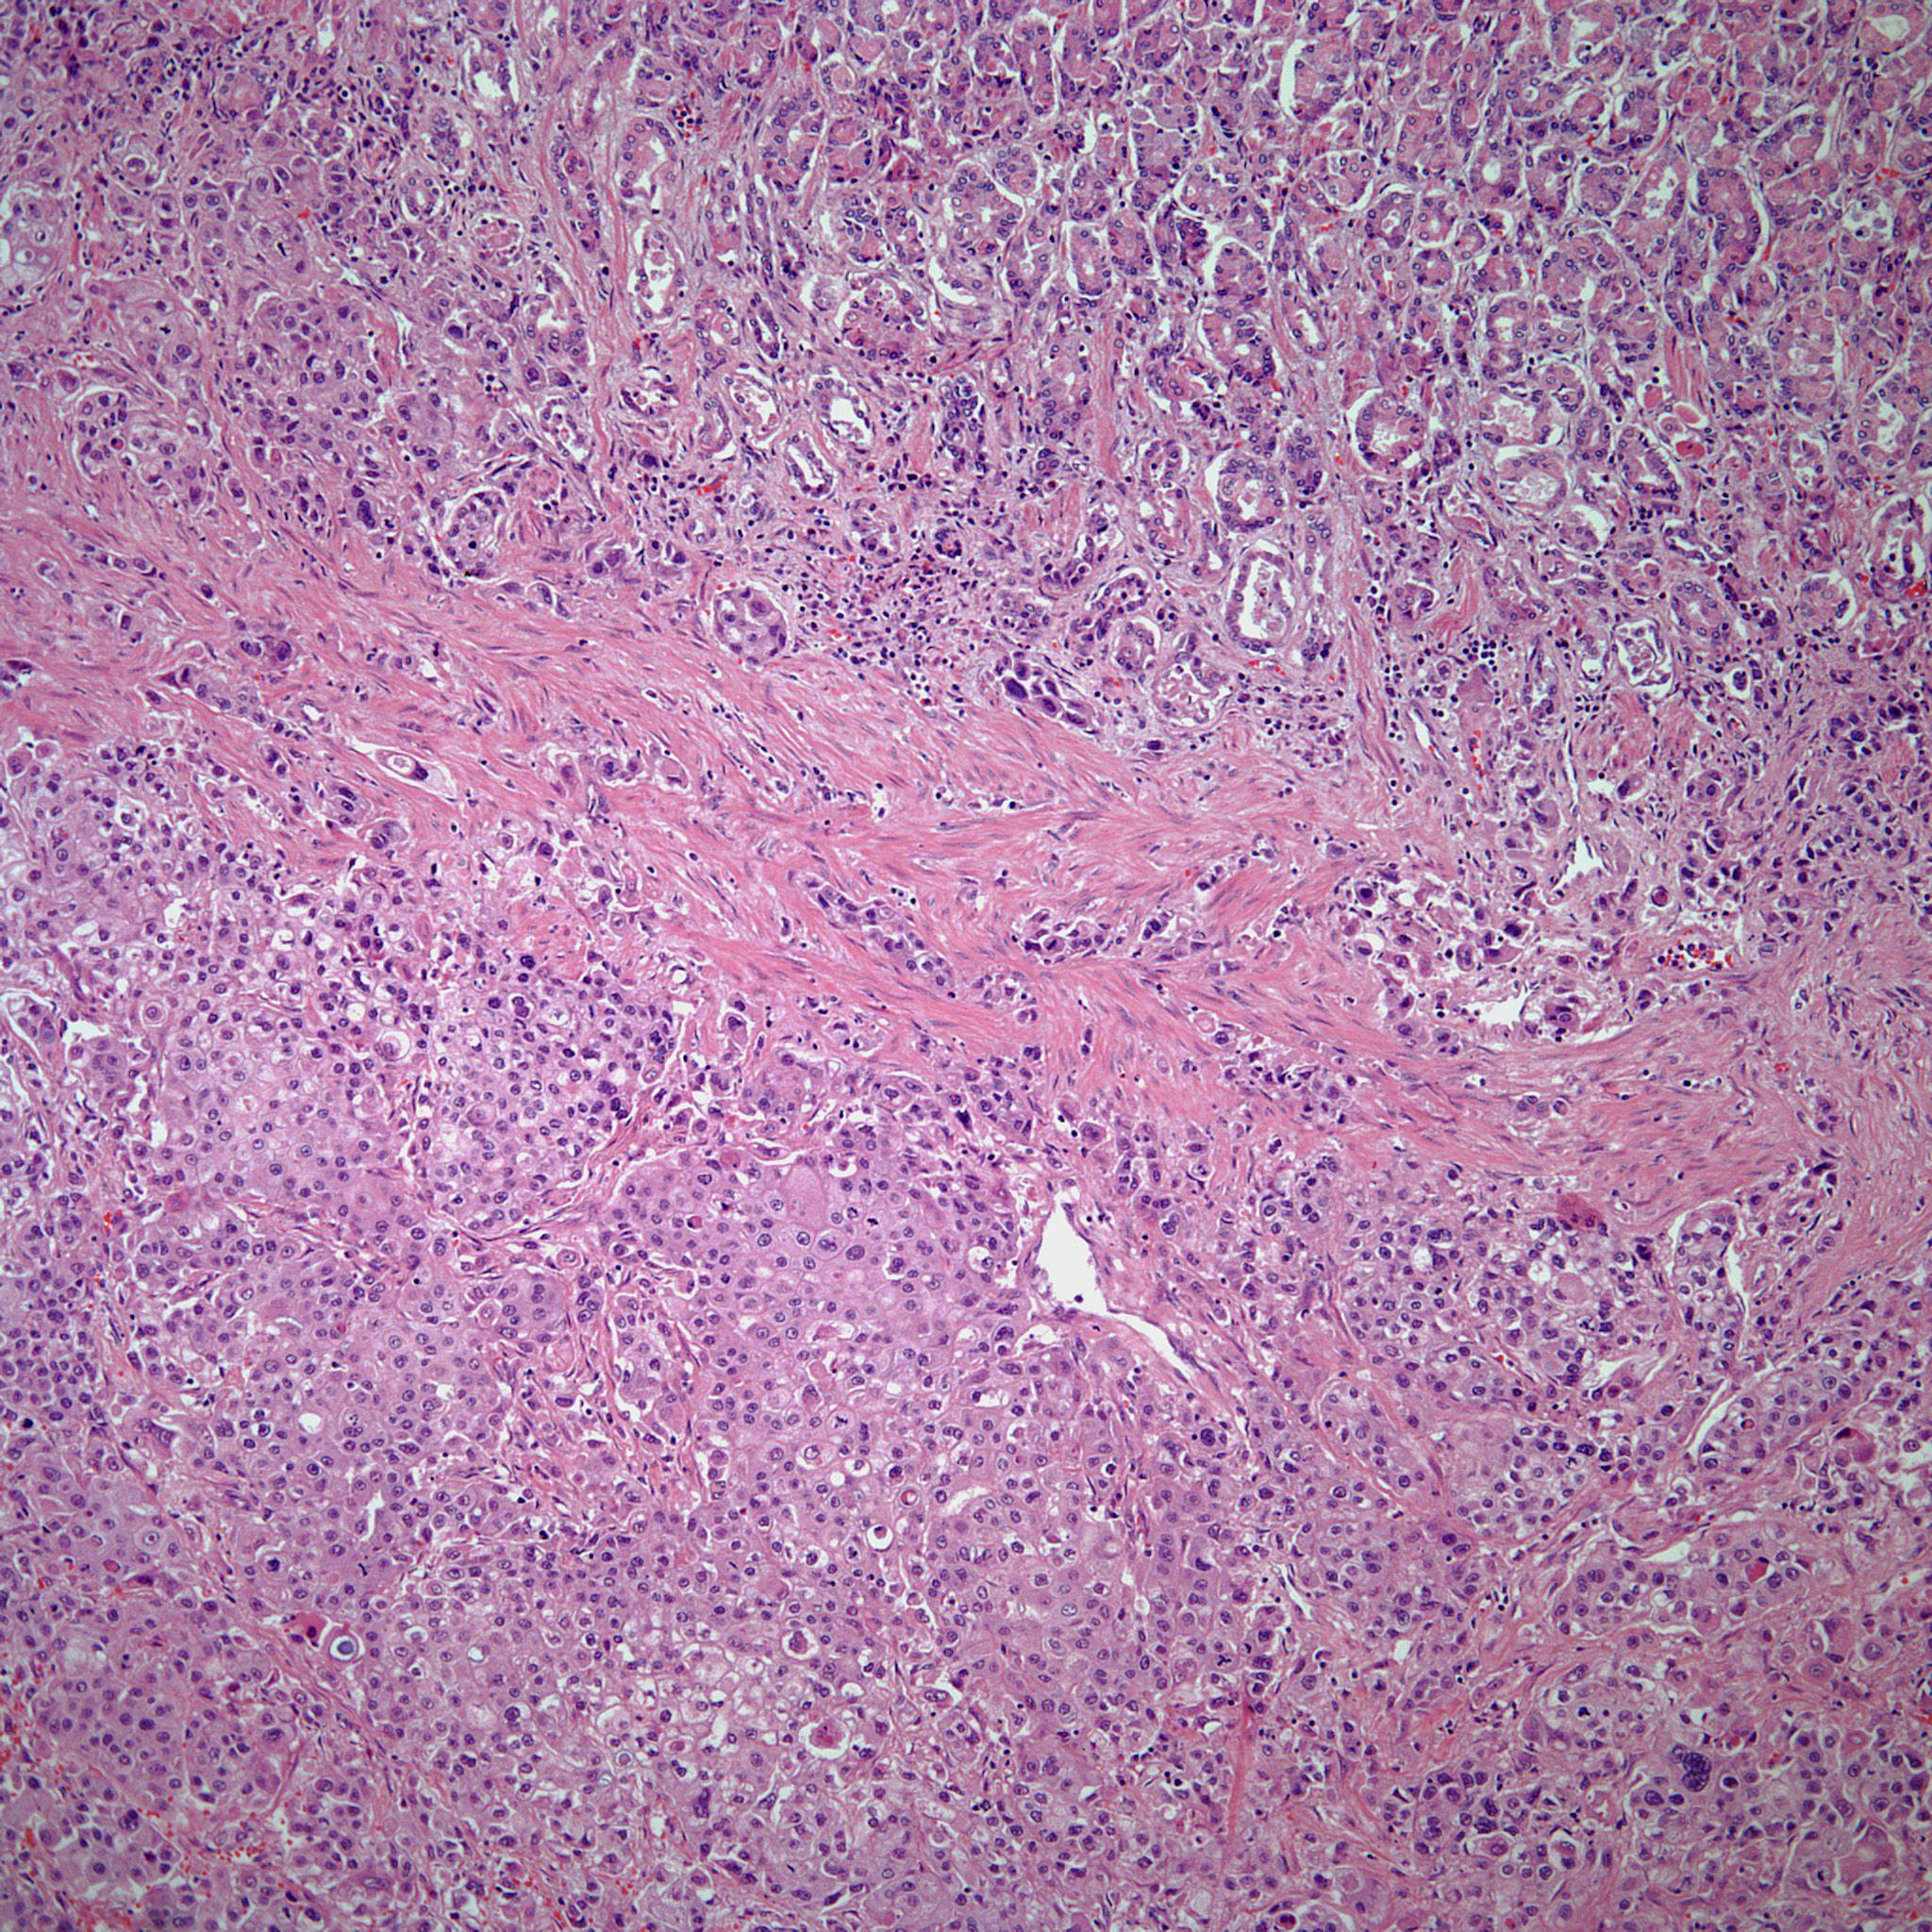 A 59-Year-Old Male With Abdominal Pain, Gastric Mass